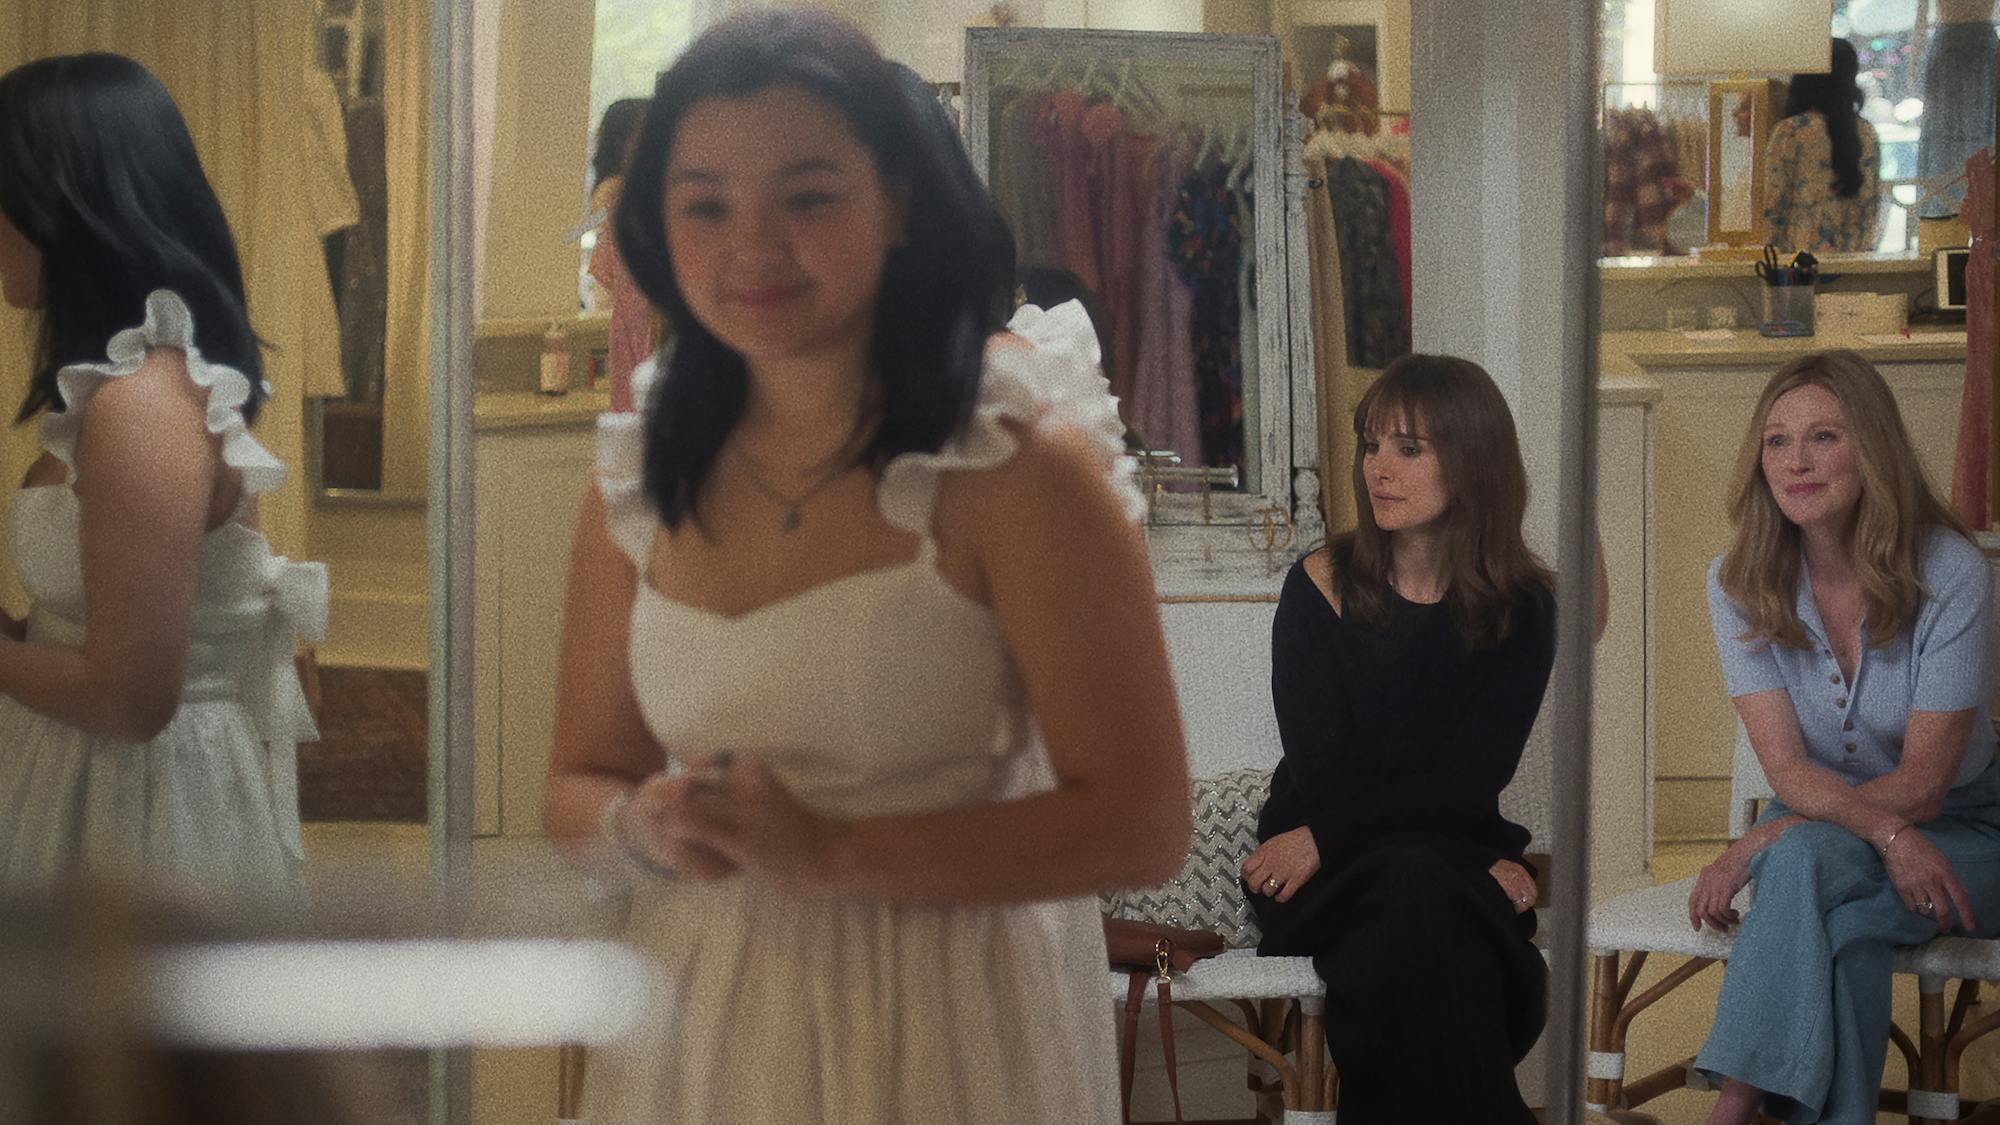 Mary Atherton-Yoo (Elizabeth Yu) tries on a white dress as Elizabeth Barry (Natalie Portman) and Gracie Atherton-Yoo (Julianne Moore) sit nearby and look on.